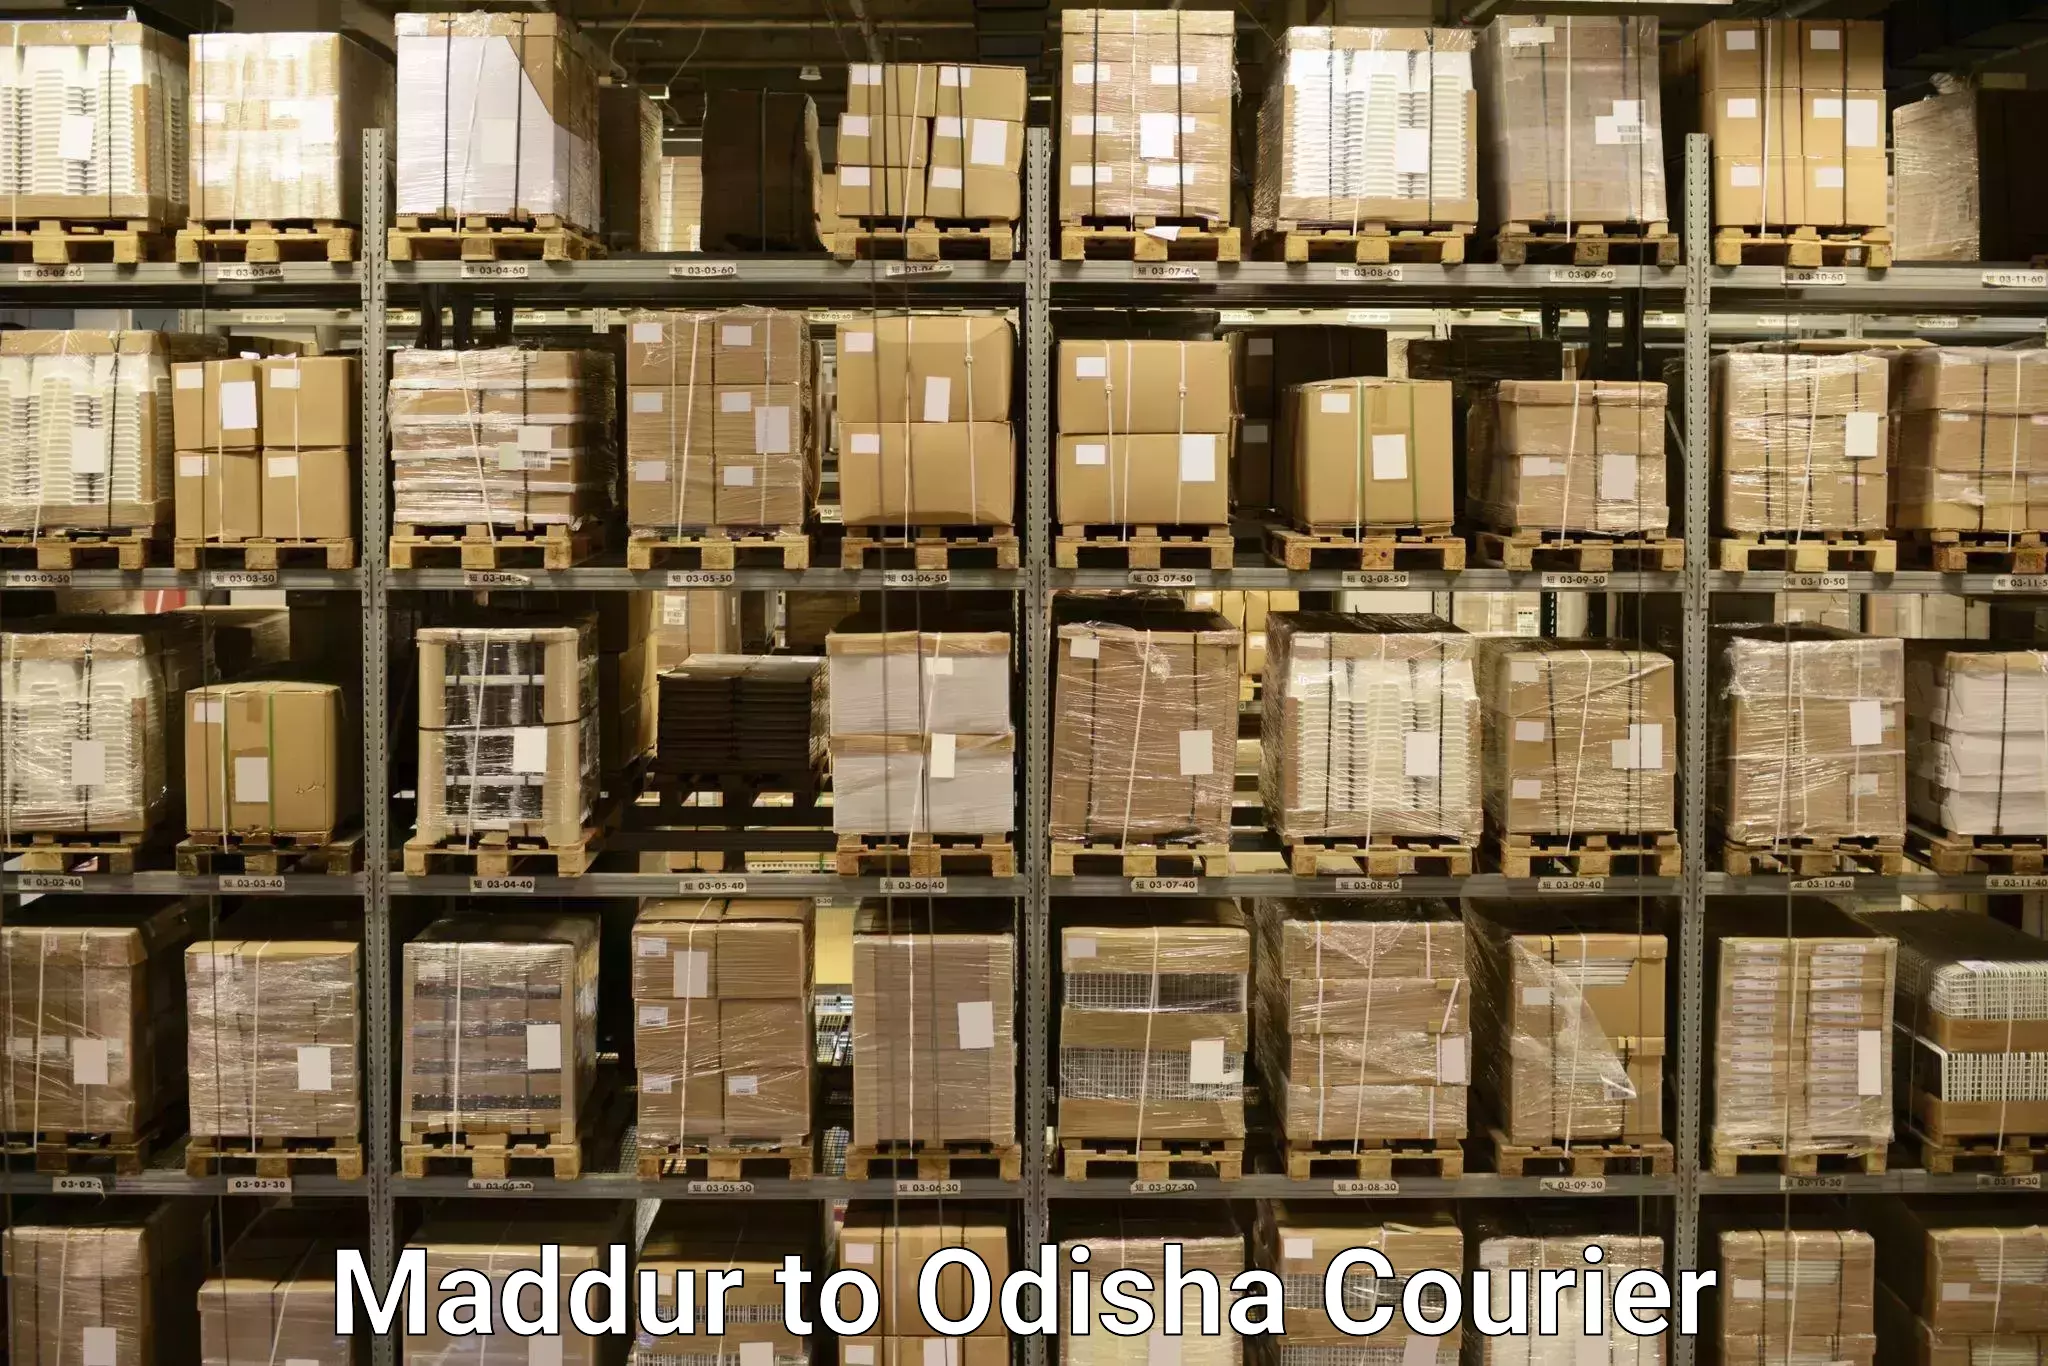 Baggage shipping schedule in Maddur to Ukhunda